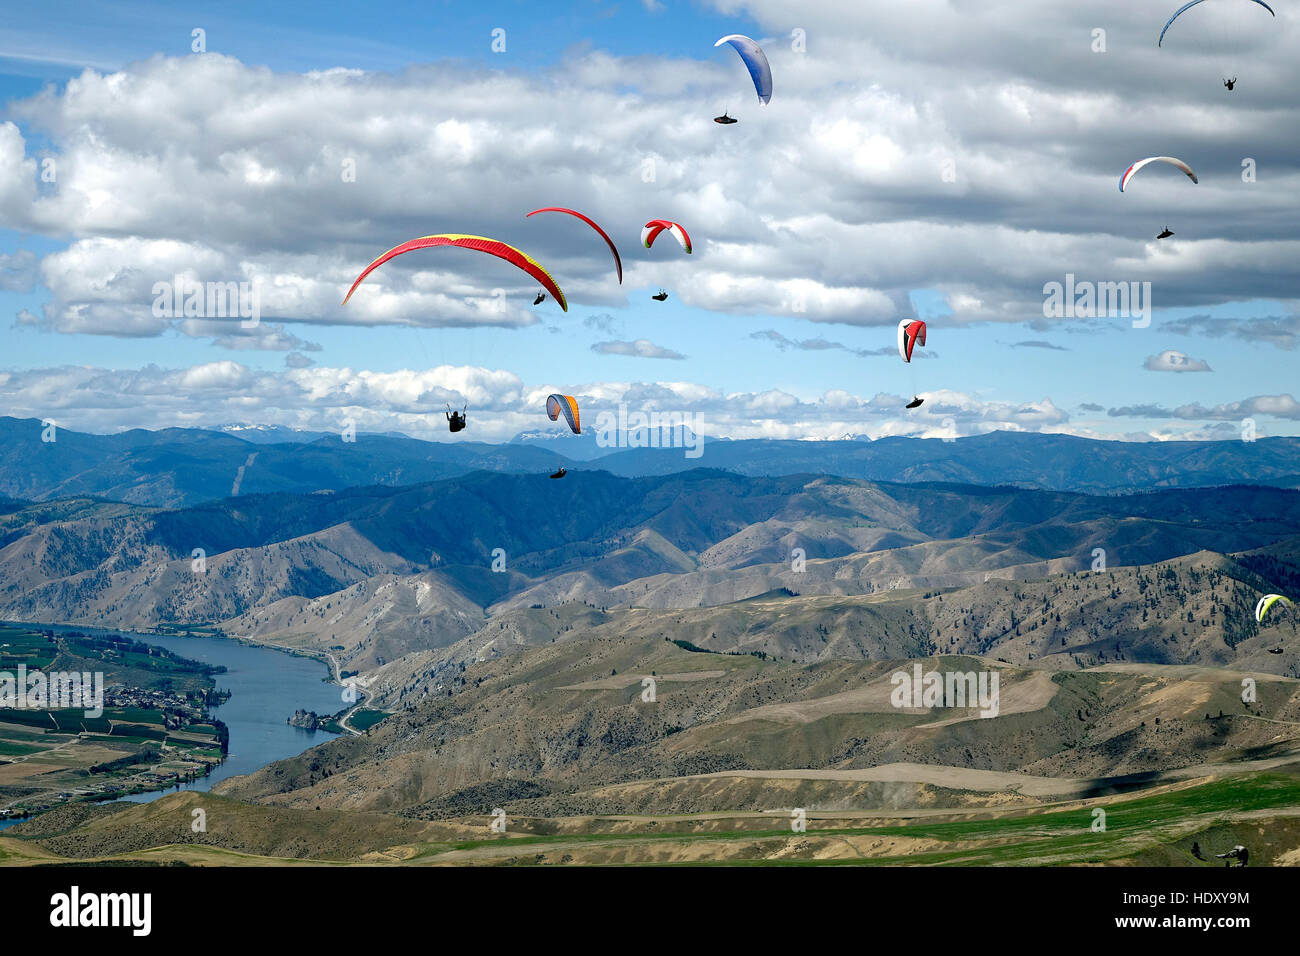 Paraglider pilots flying in a gaggle at the U.S. National Paragliding Championships in Chelan. Stock Photo